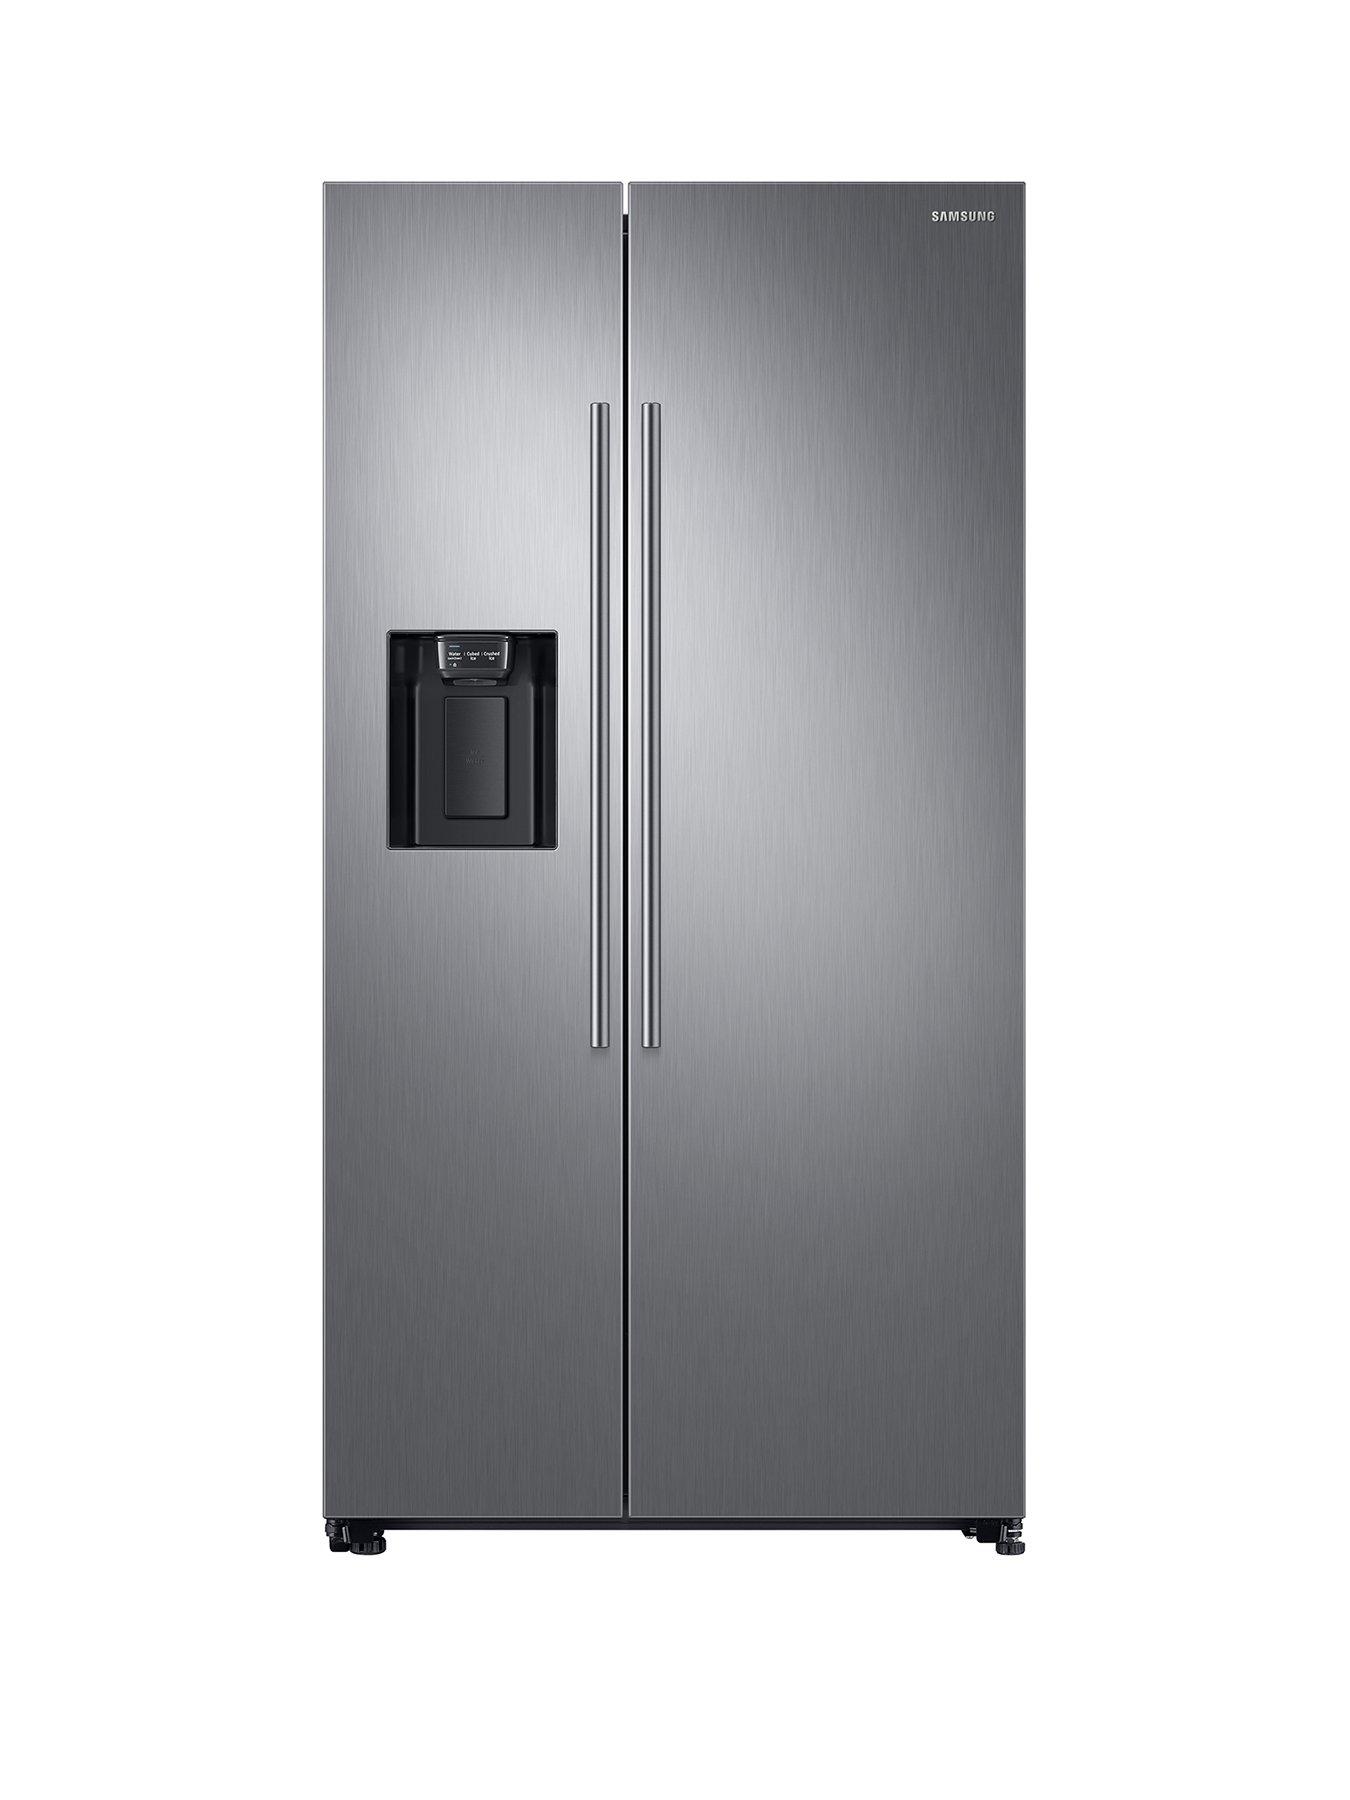 Samsung Rs67N8210S9/Eu America Style Frost-Free Fridge Freezer With Plumbed Water, Ice Dispenser And 5 Year Samsung Parts And Labour Warranty – Matt Silver